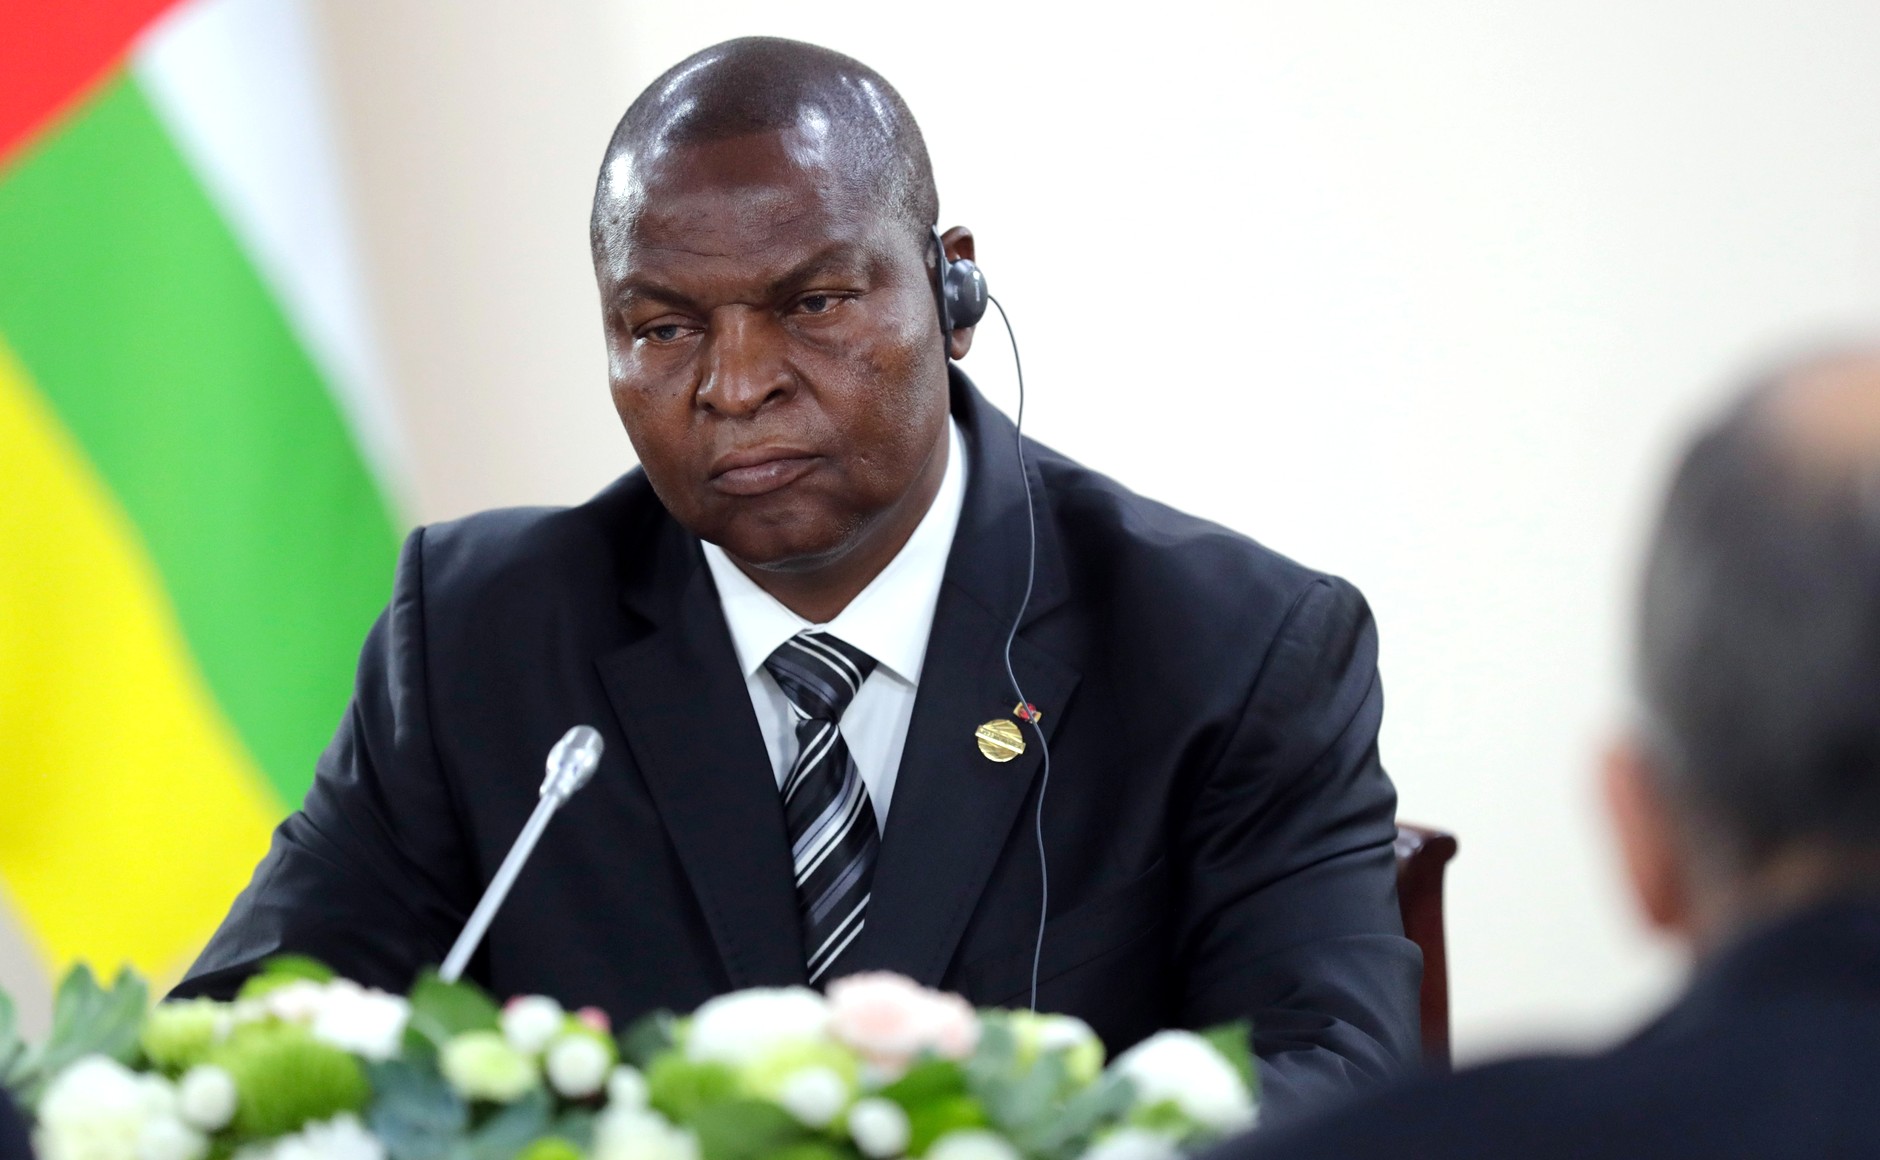 President of Central African Republic orders removal of top judge from Constitutional Court